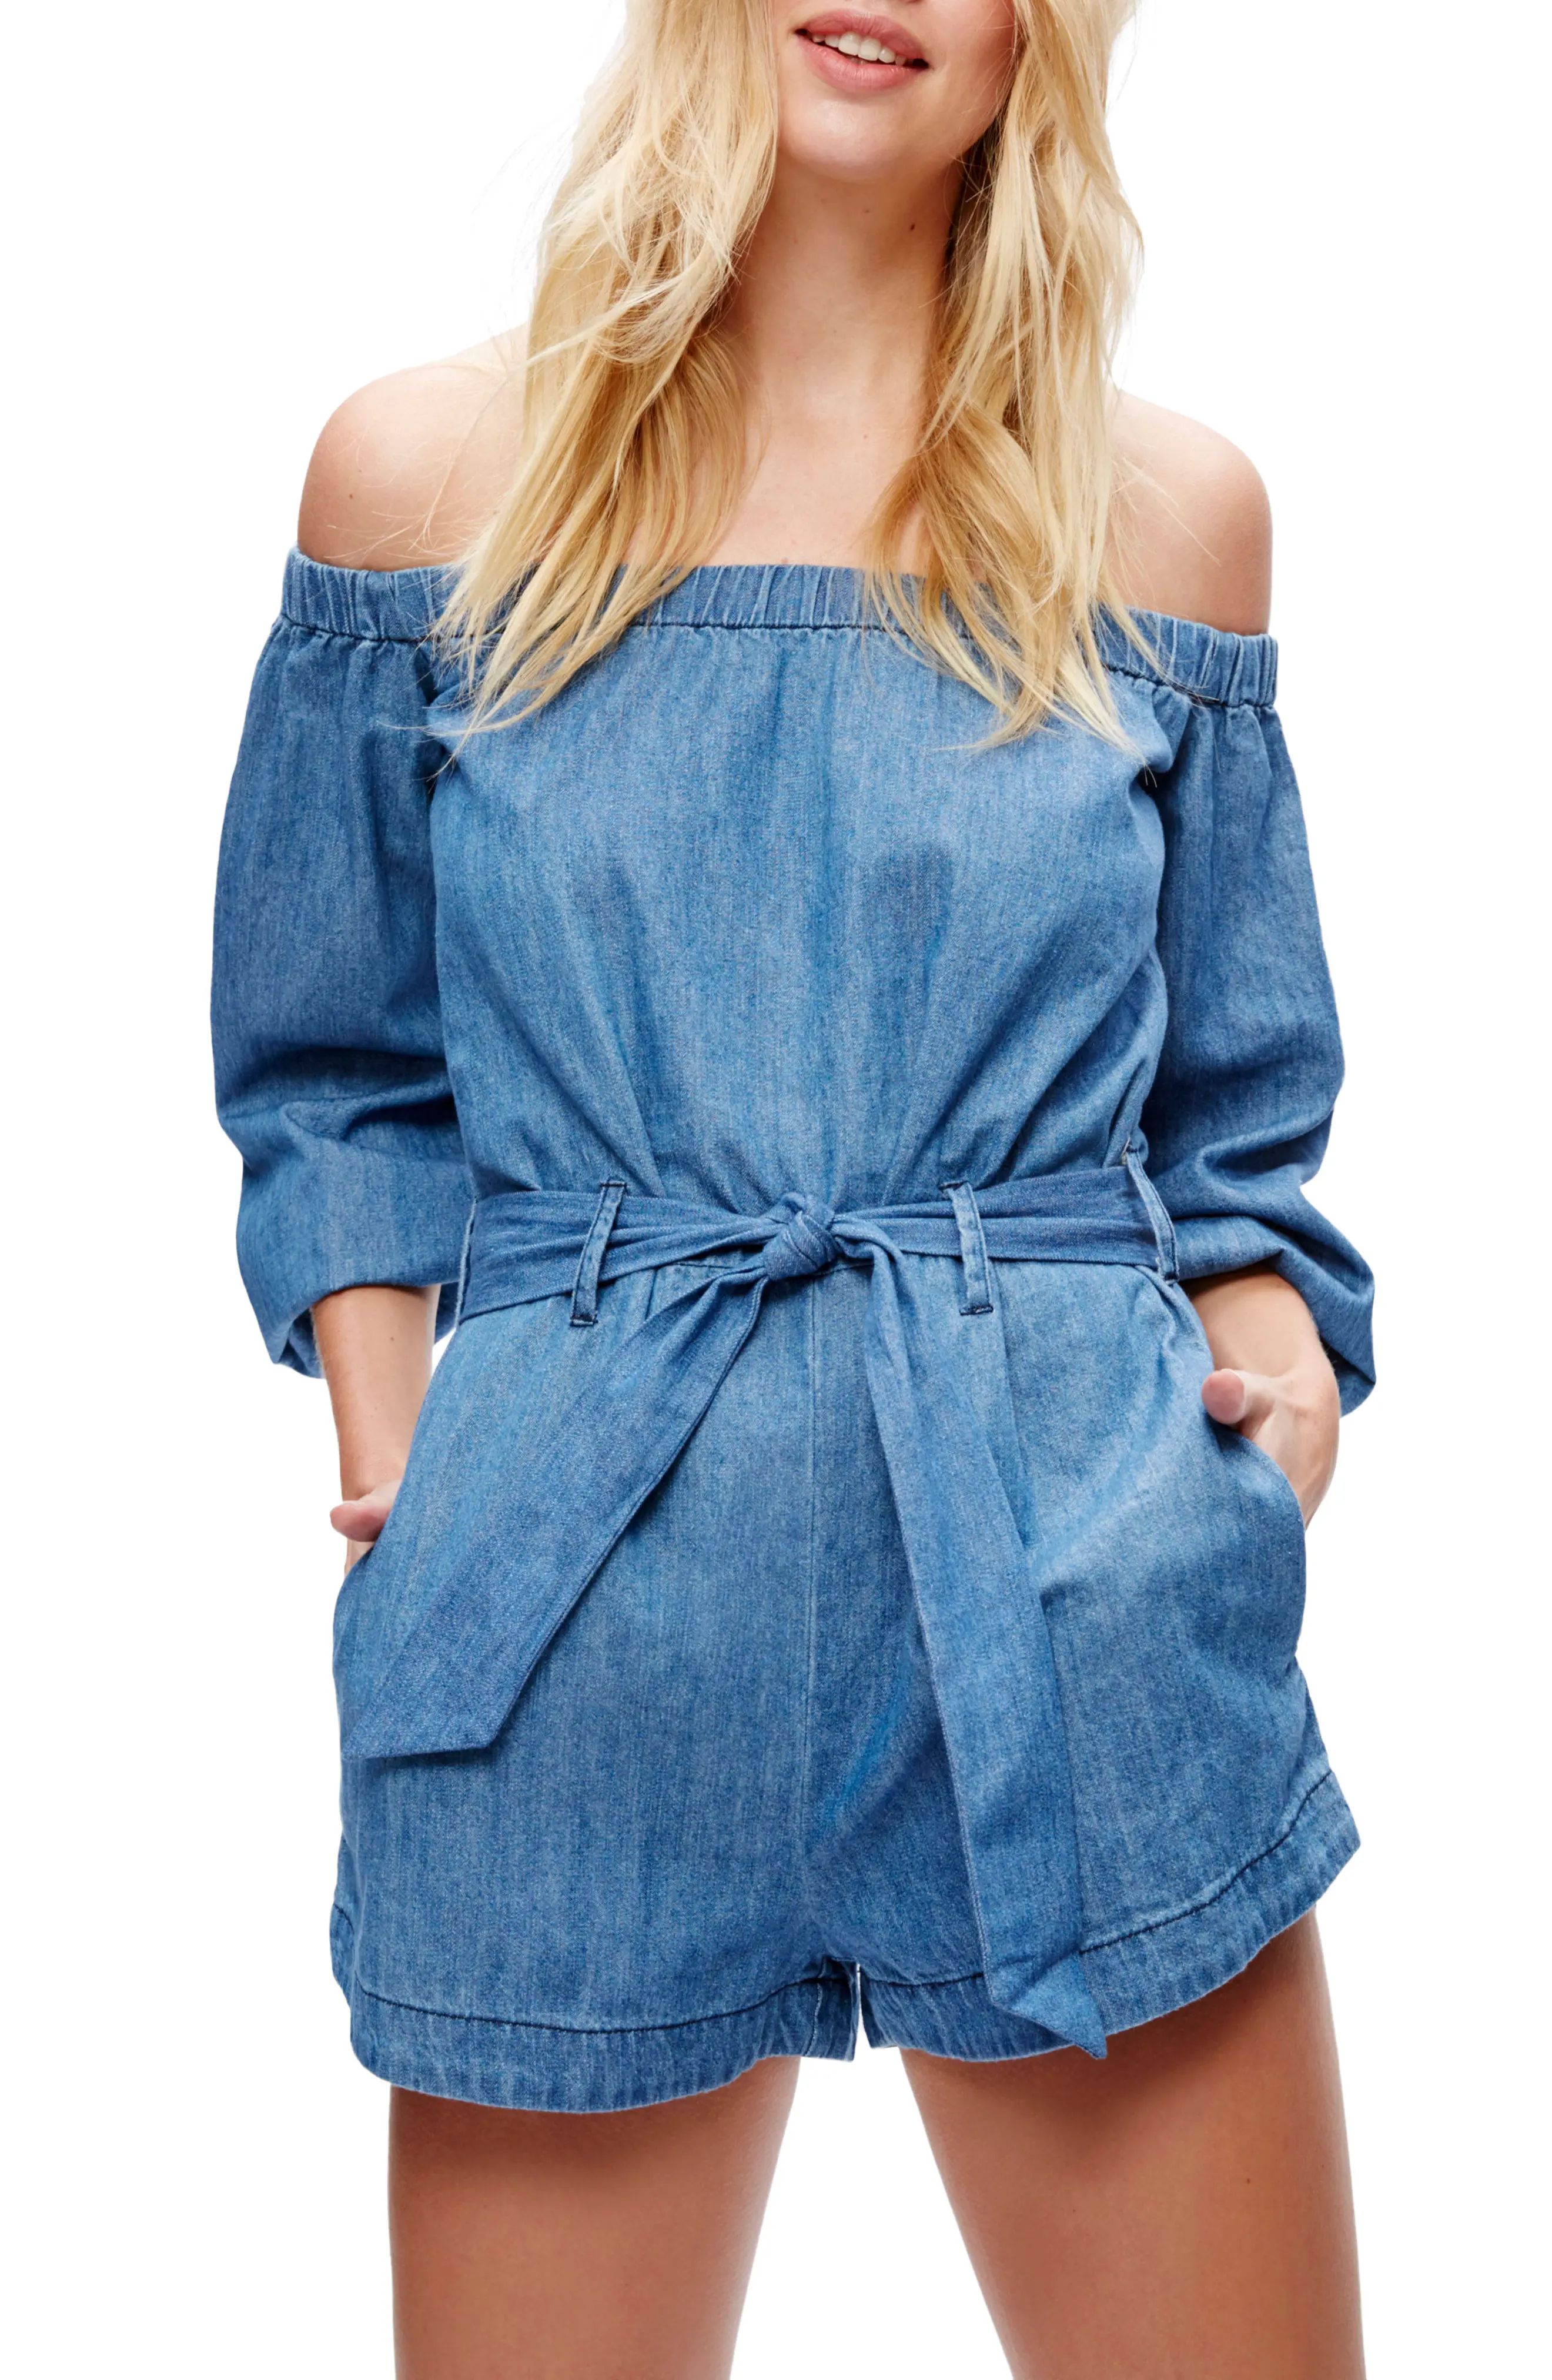 Tangled in Willows Off the Shoulder Romper | Nordstrom